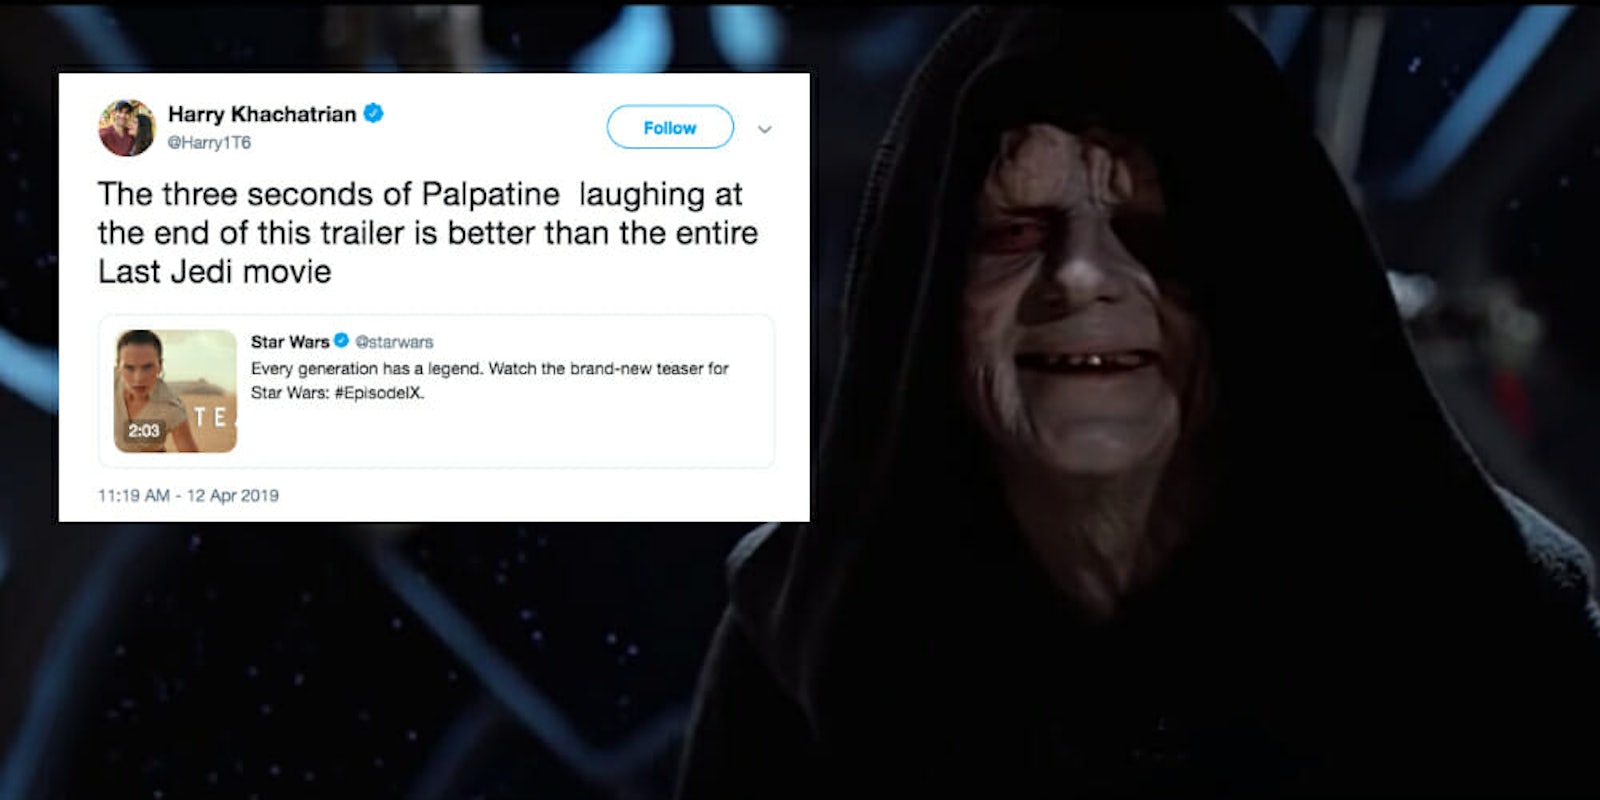 Is That Palpatine Laughing in 'Star Wars IX: The Rise of Skywalker'?